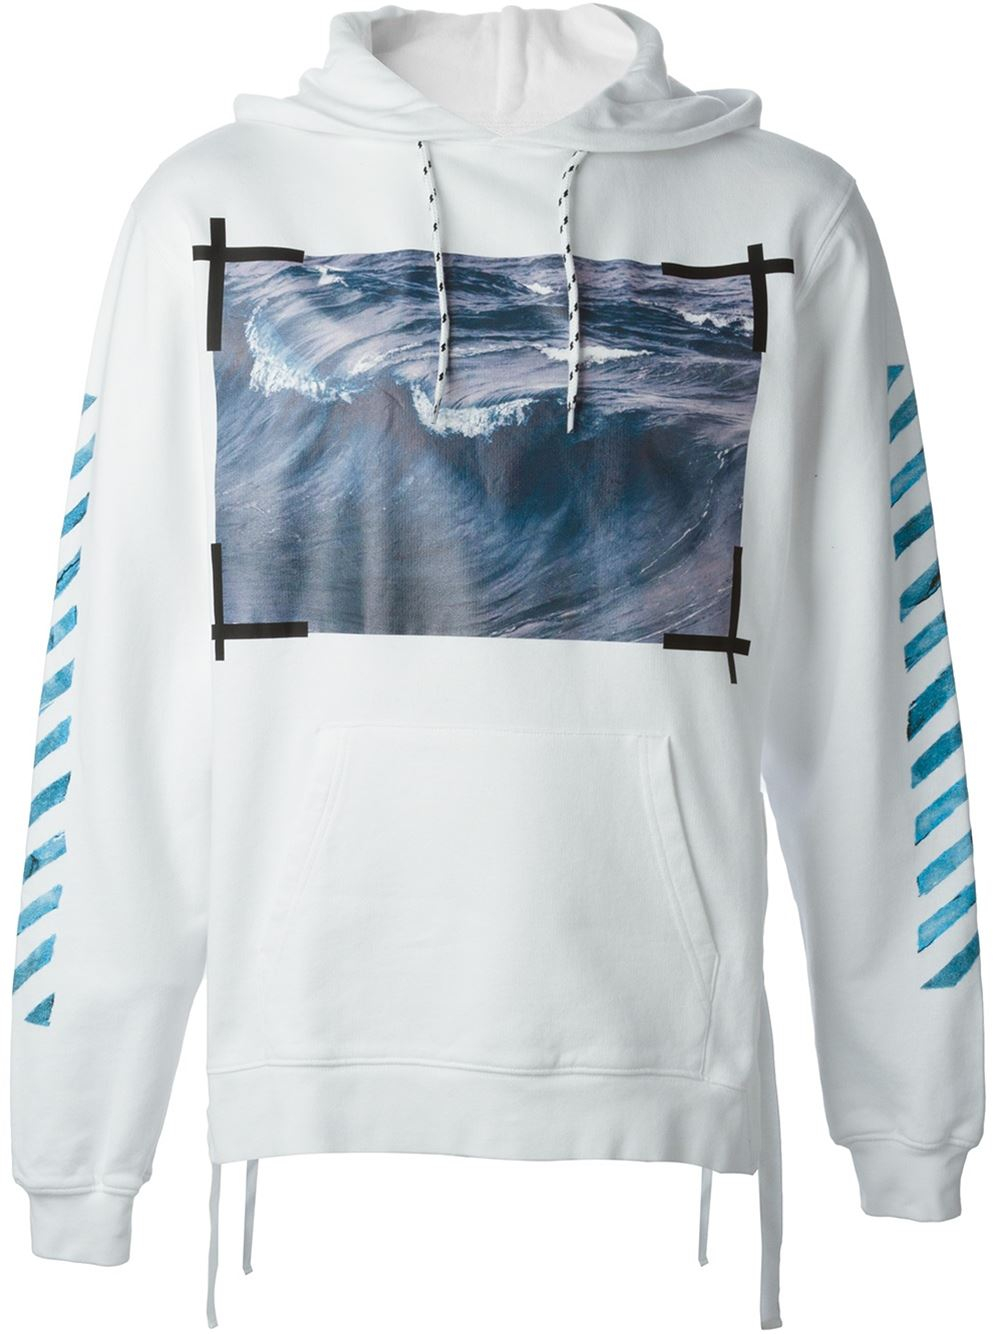 off waves hoodie Shop Clothing & Shoes Online